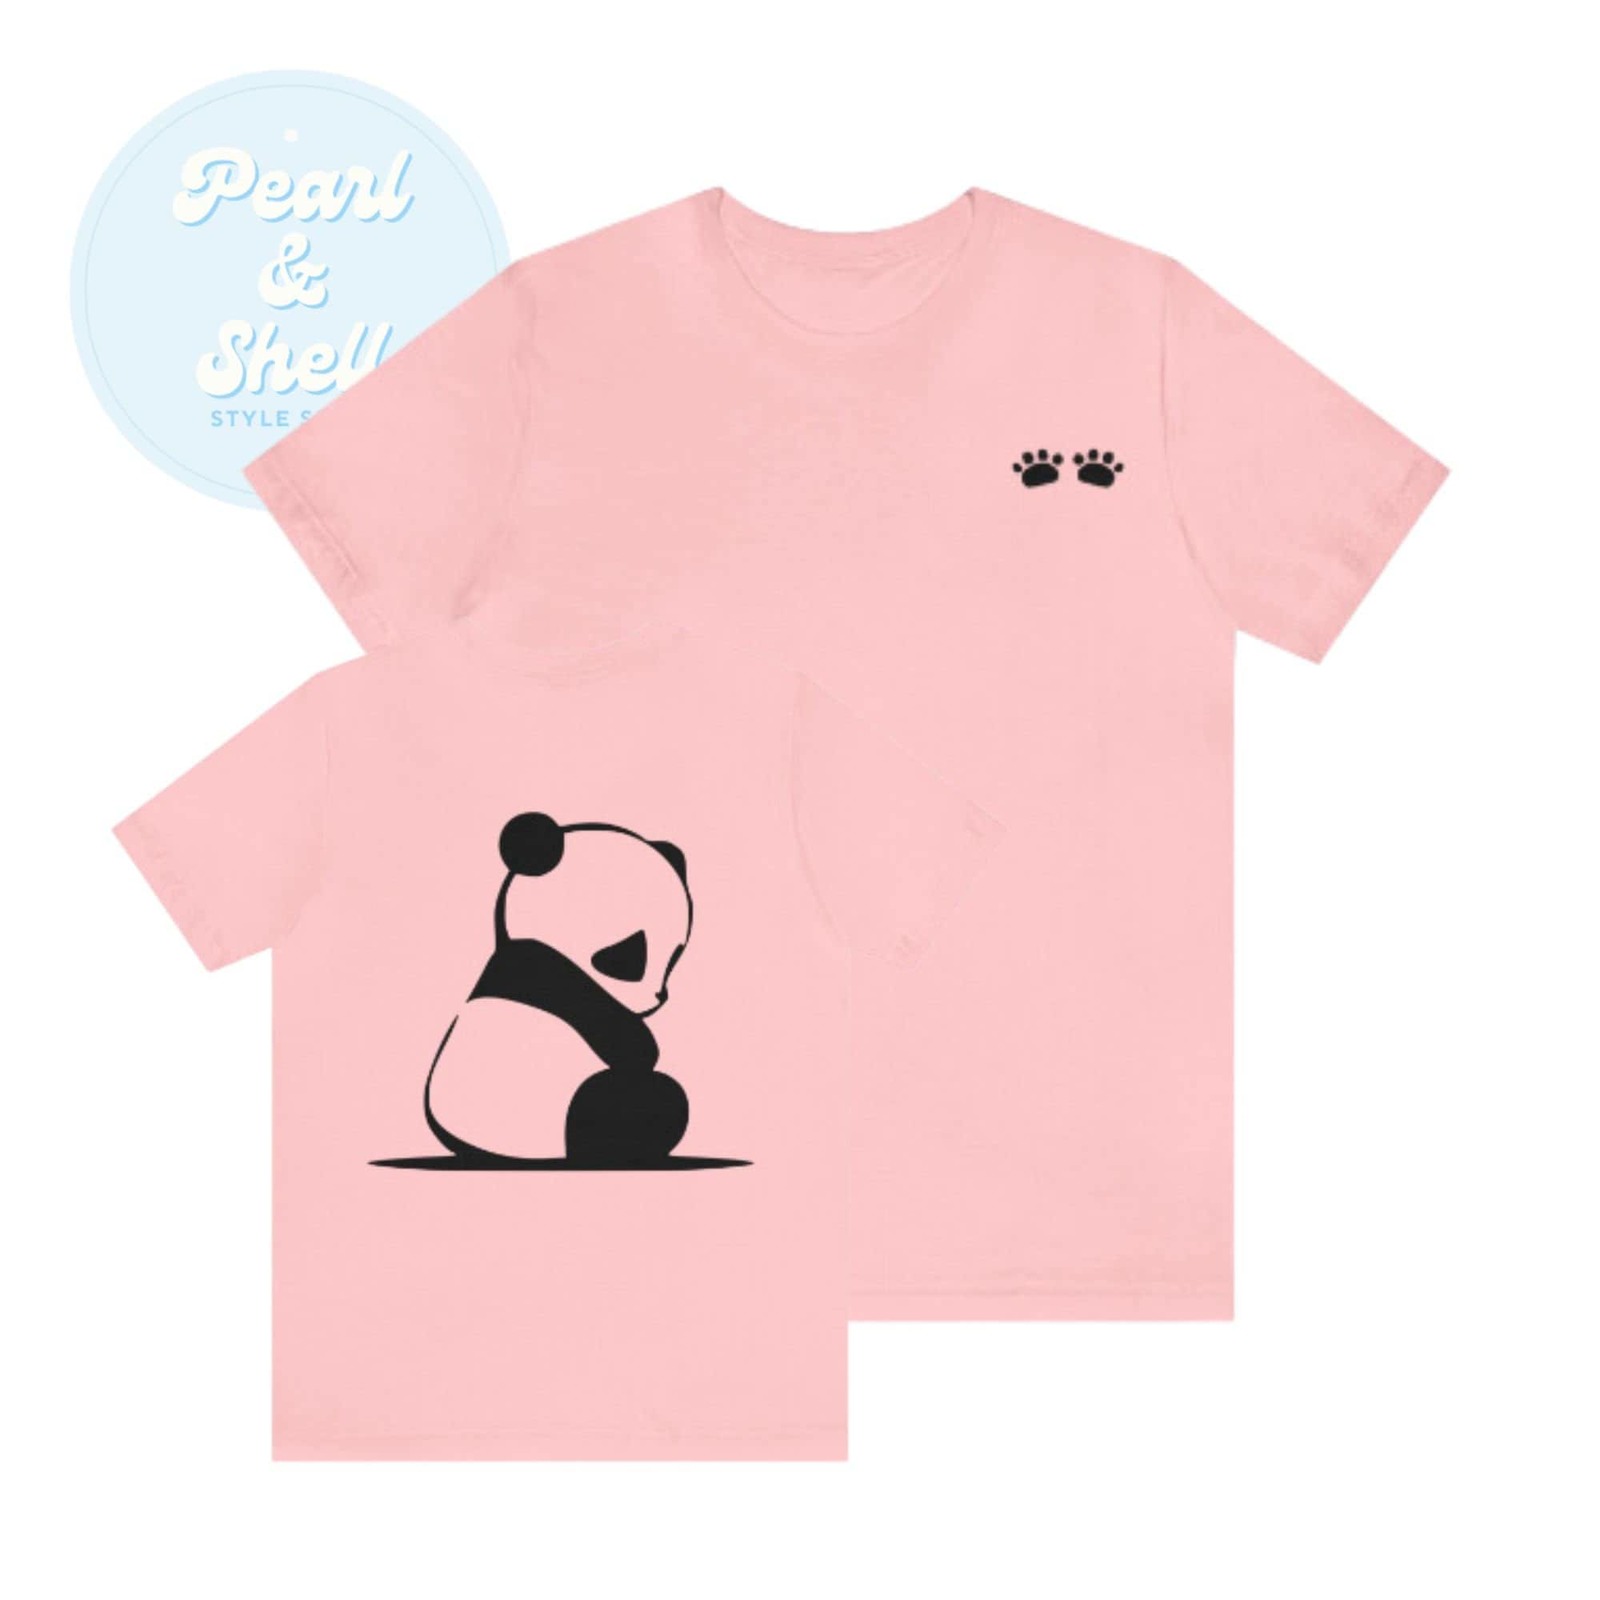 Primary image for unisex panda tshirt, white, gray, brown, blue, pink S, M, L, XL, 2XL